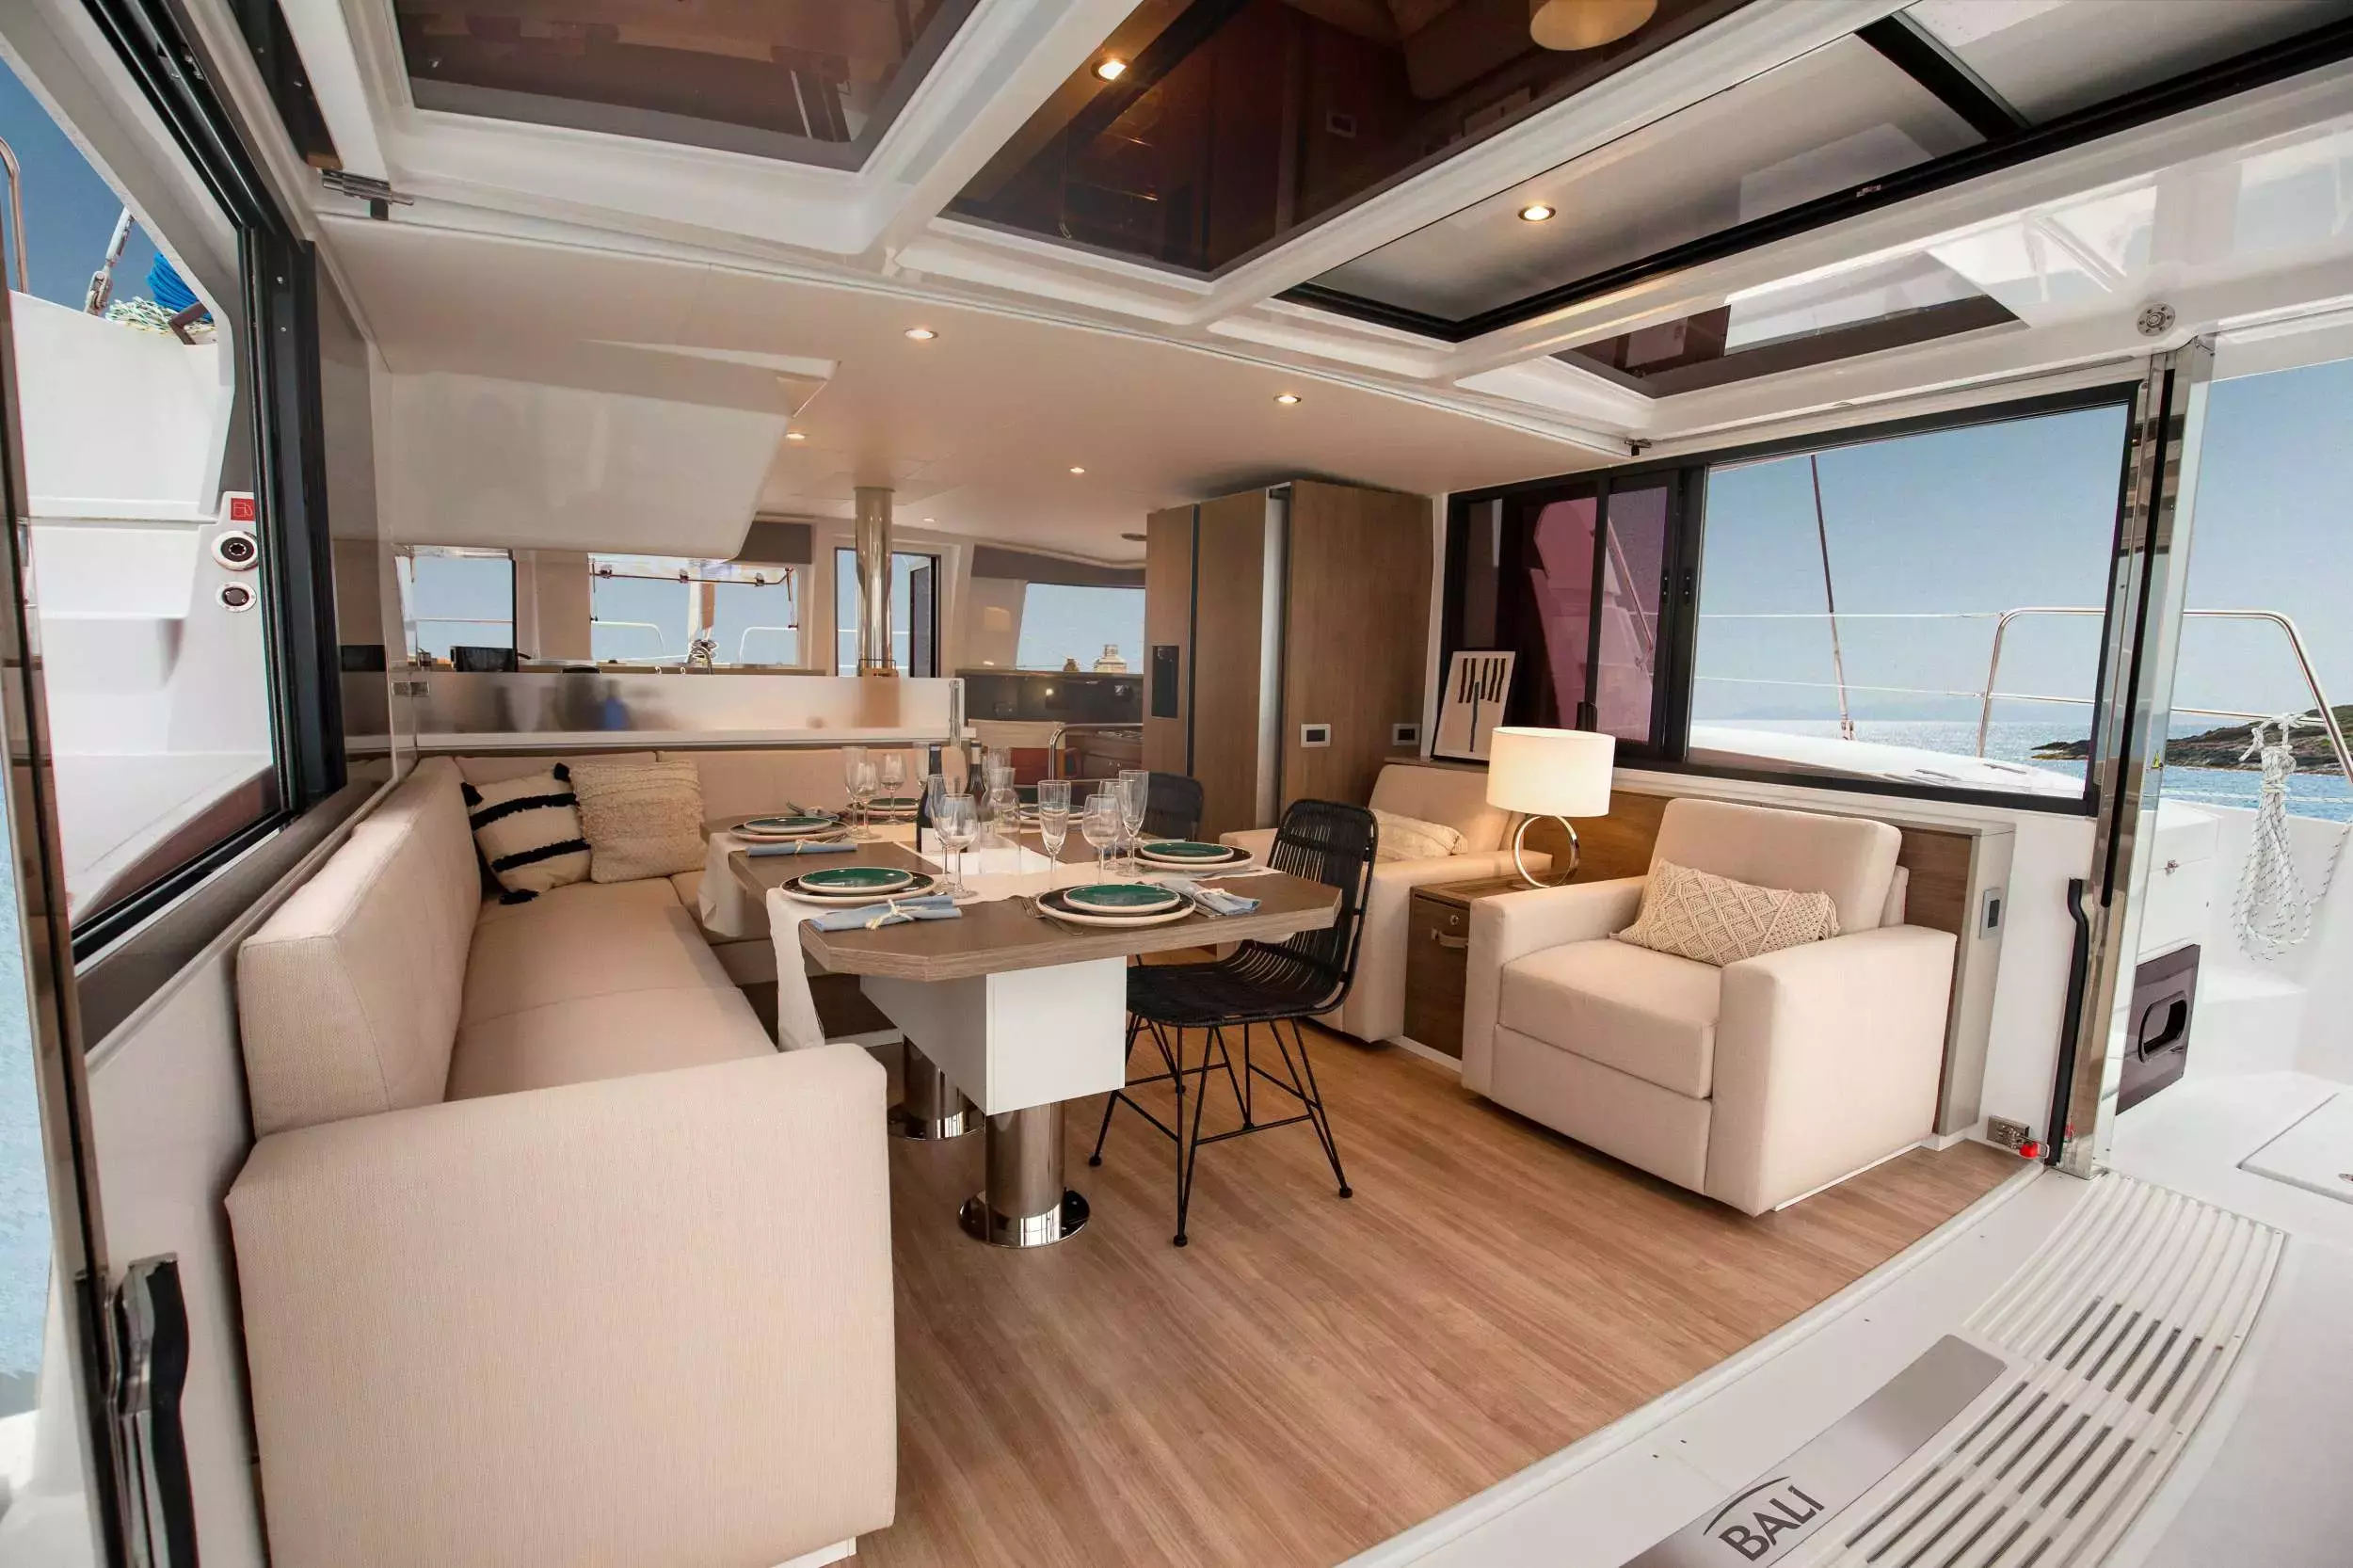 Said by Bali Catamarans - Top rates for a Charter of a private Sailing Catamaran in Spain